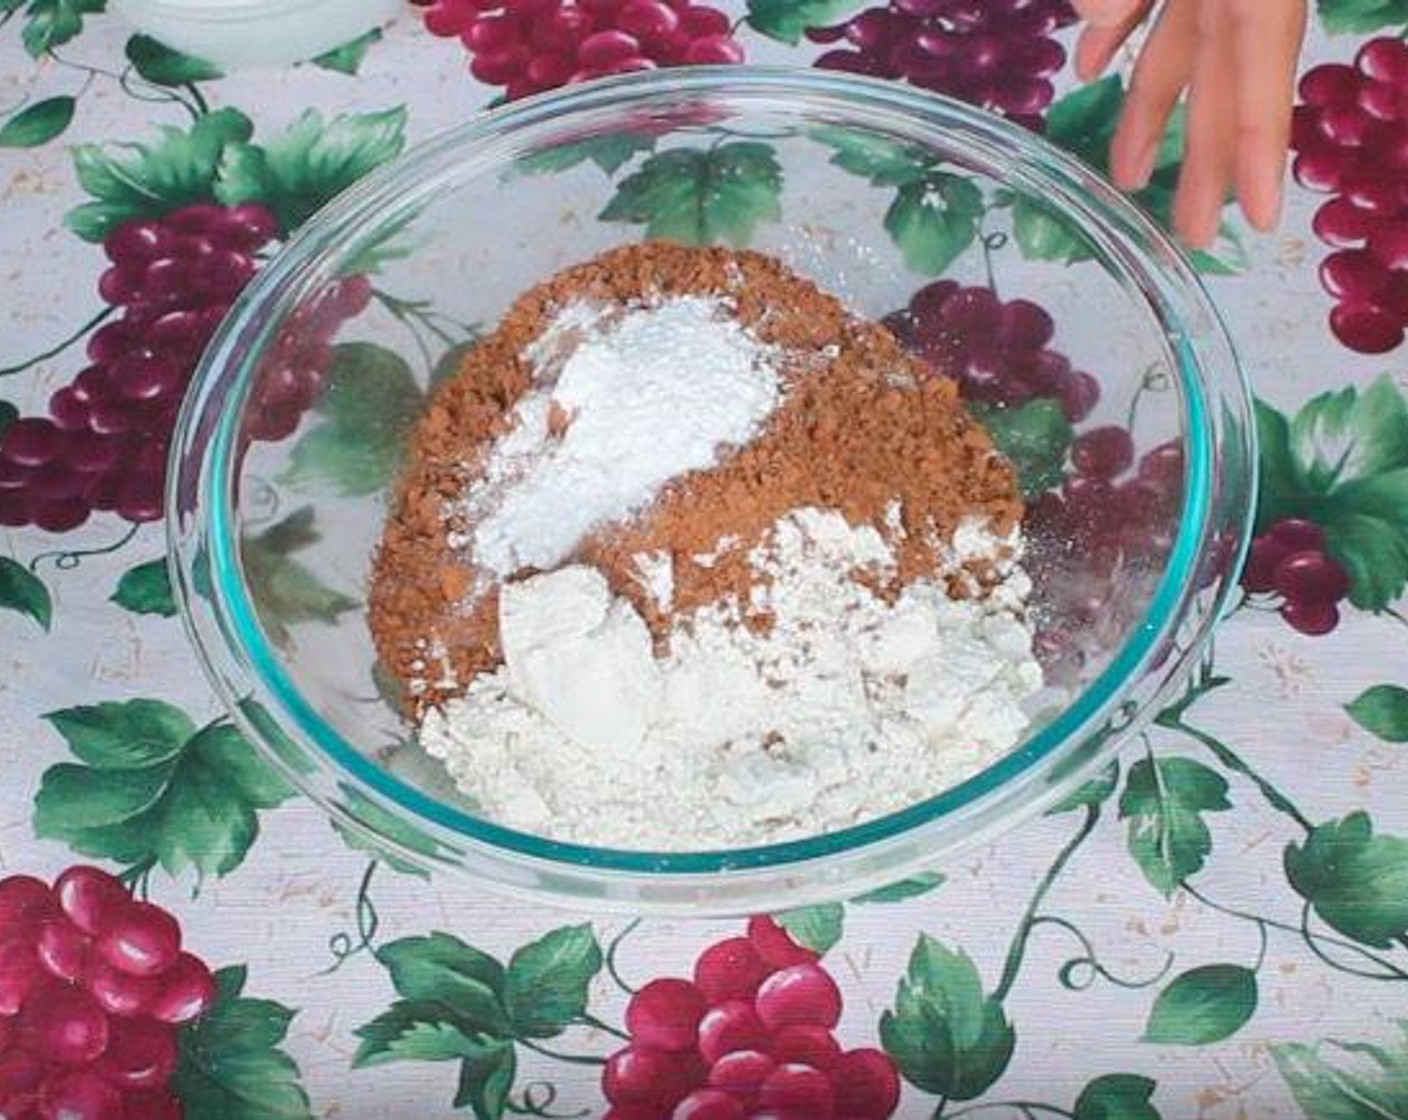 step 4 In a separate bowl, add All-Purpose Flour (2 cups), Unsweetened Cocoa Powder (3/4 cup), Baking Soda (1 tsp), Baking Powder (1/2 Tbsp), and Salt (1 tsp).